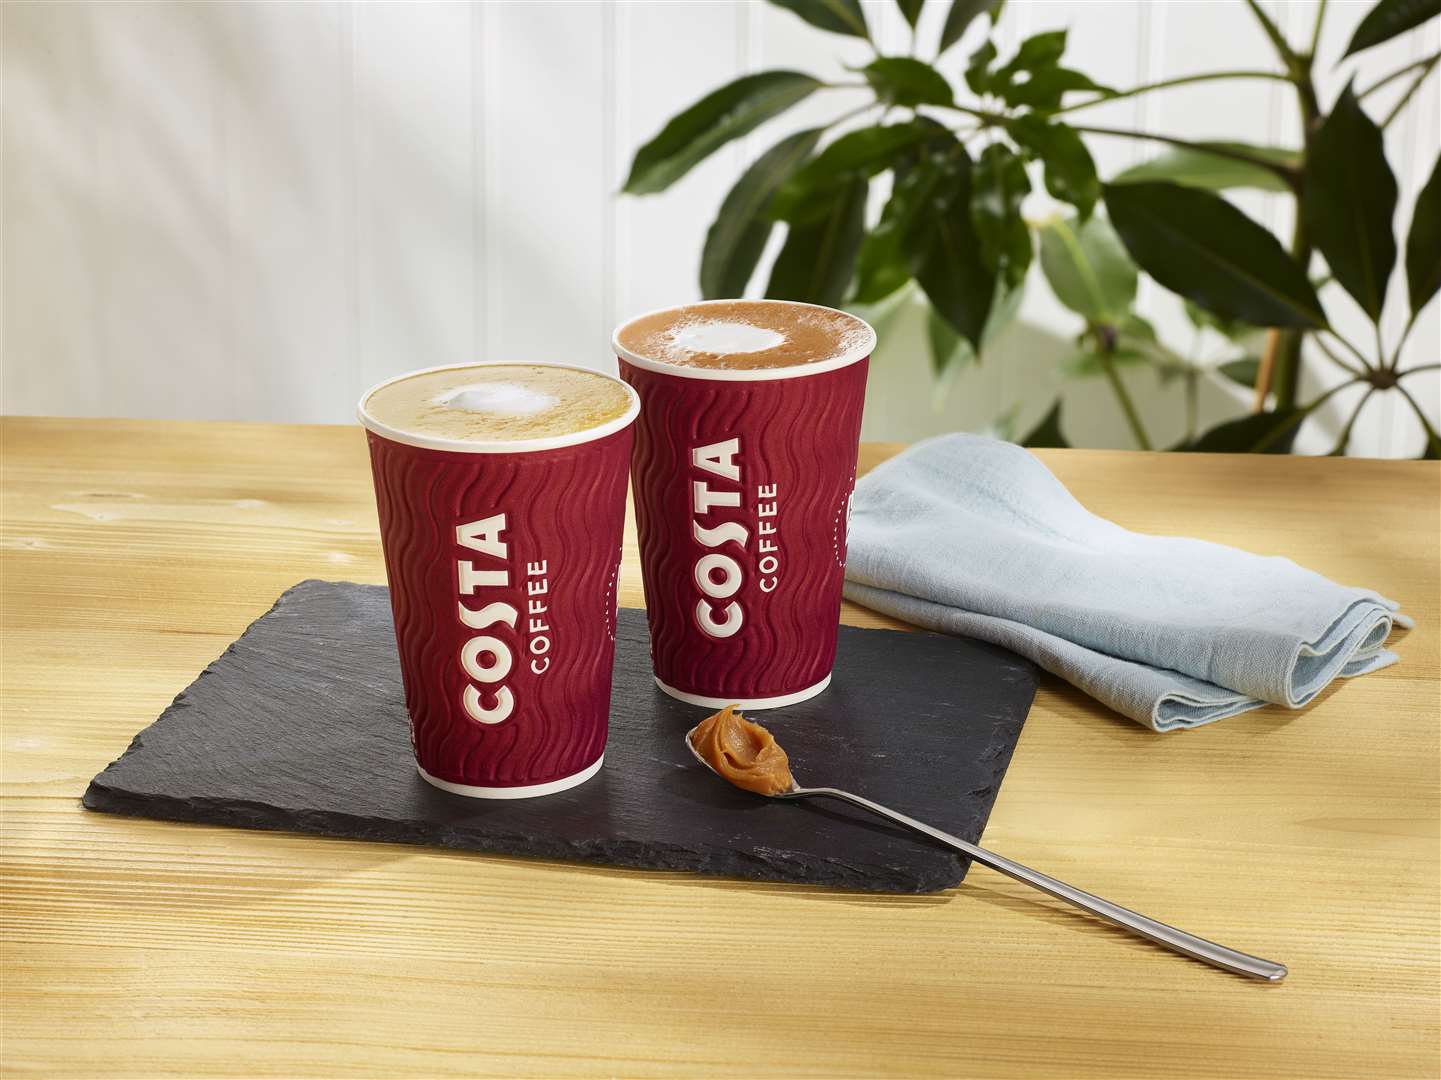 Costa operates the majority of its outlets on a franchise basis. Picture: Costa